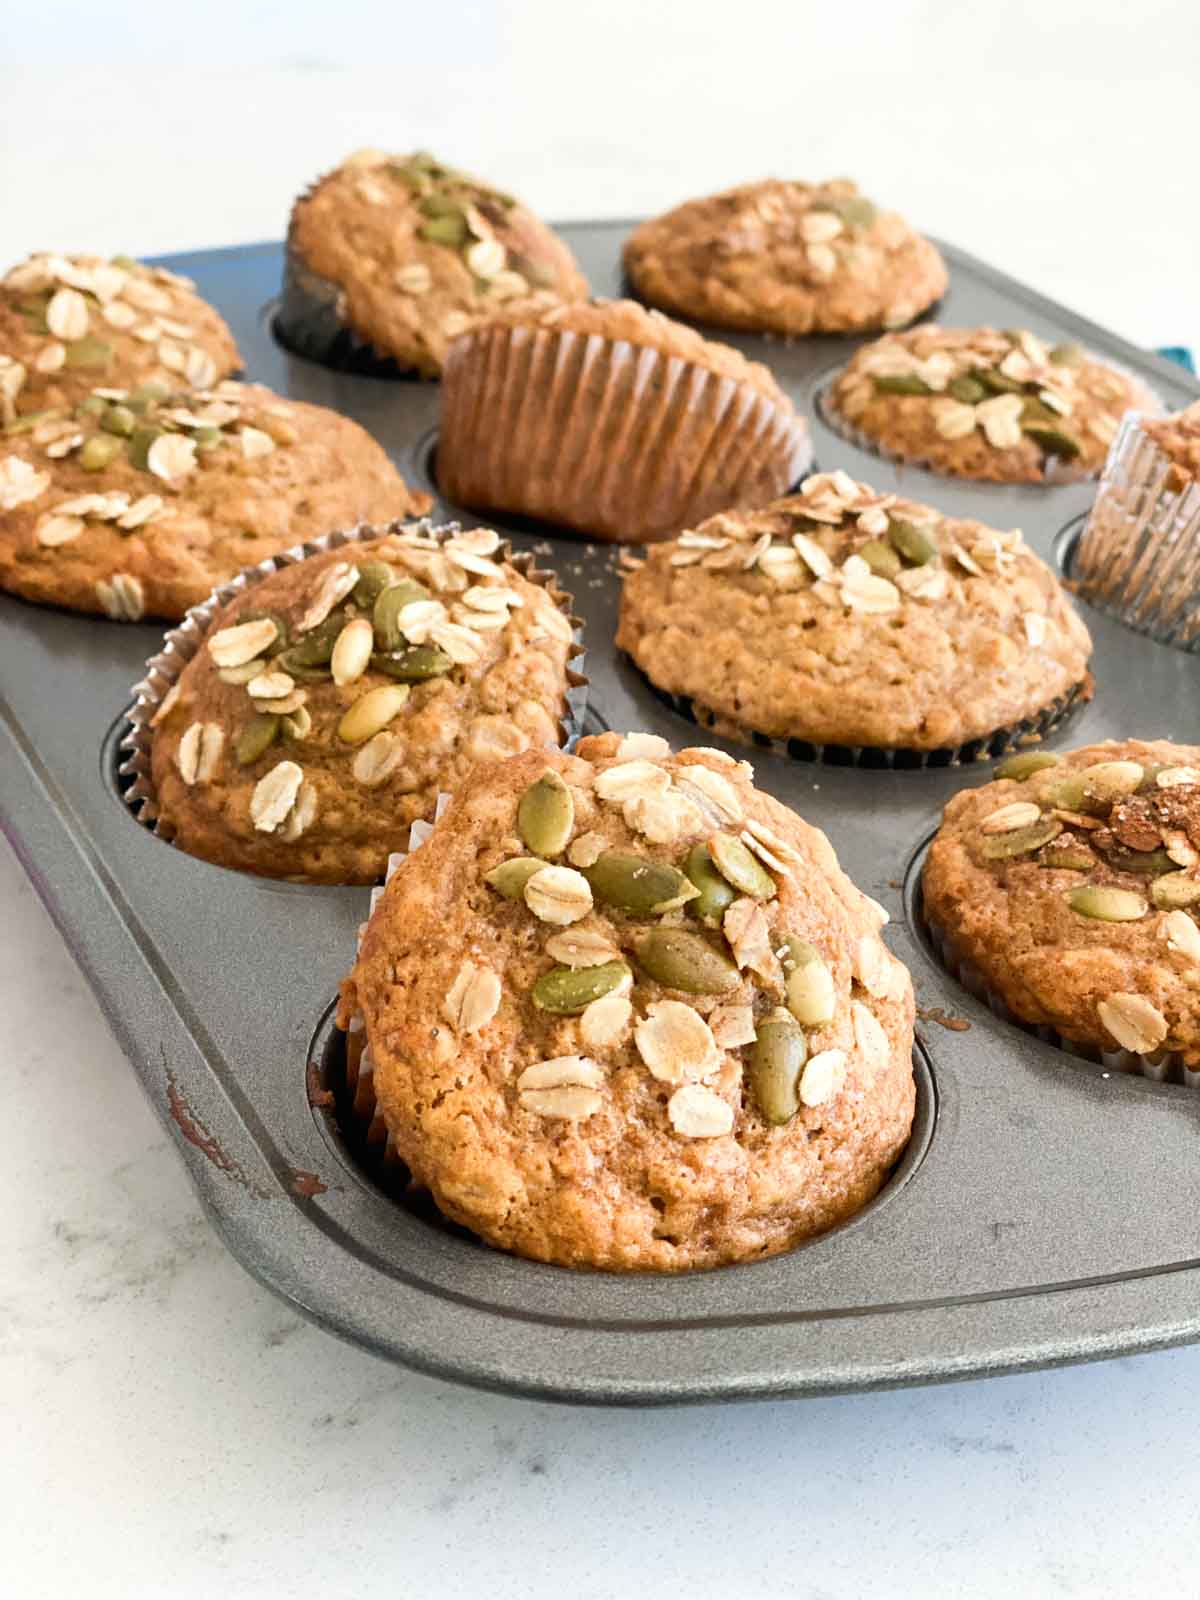 Oatmeal muffins in a pan just removed from the oven.